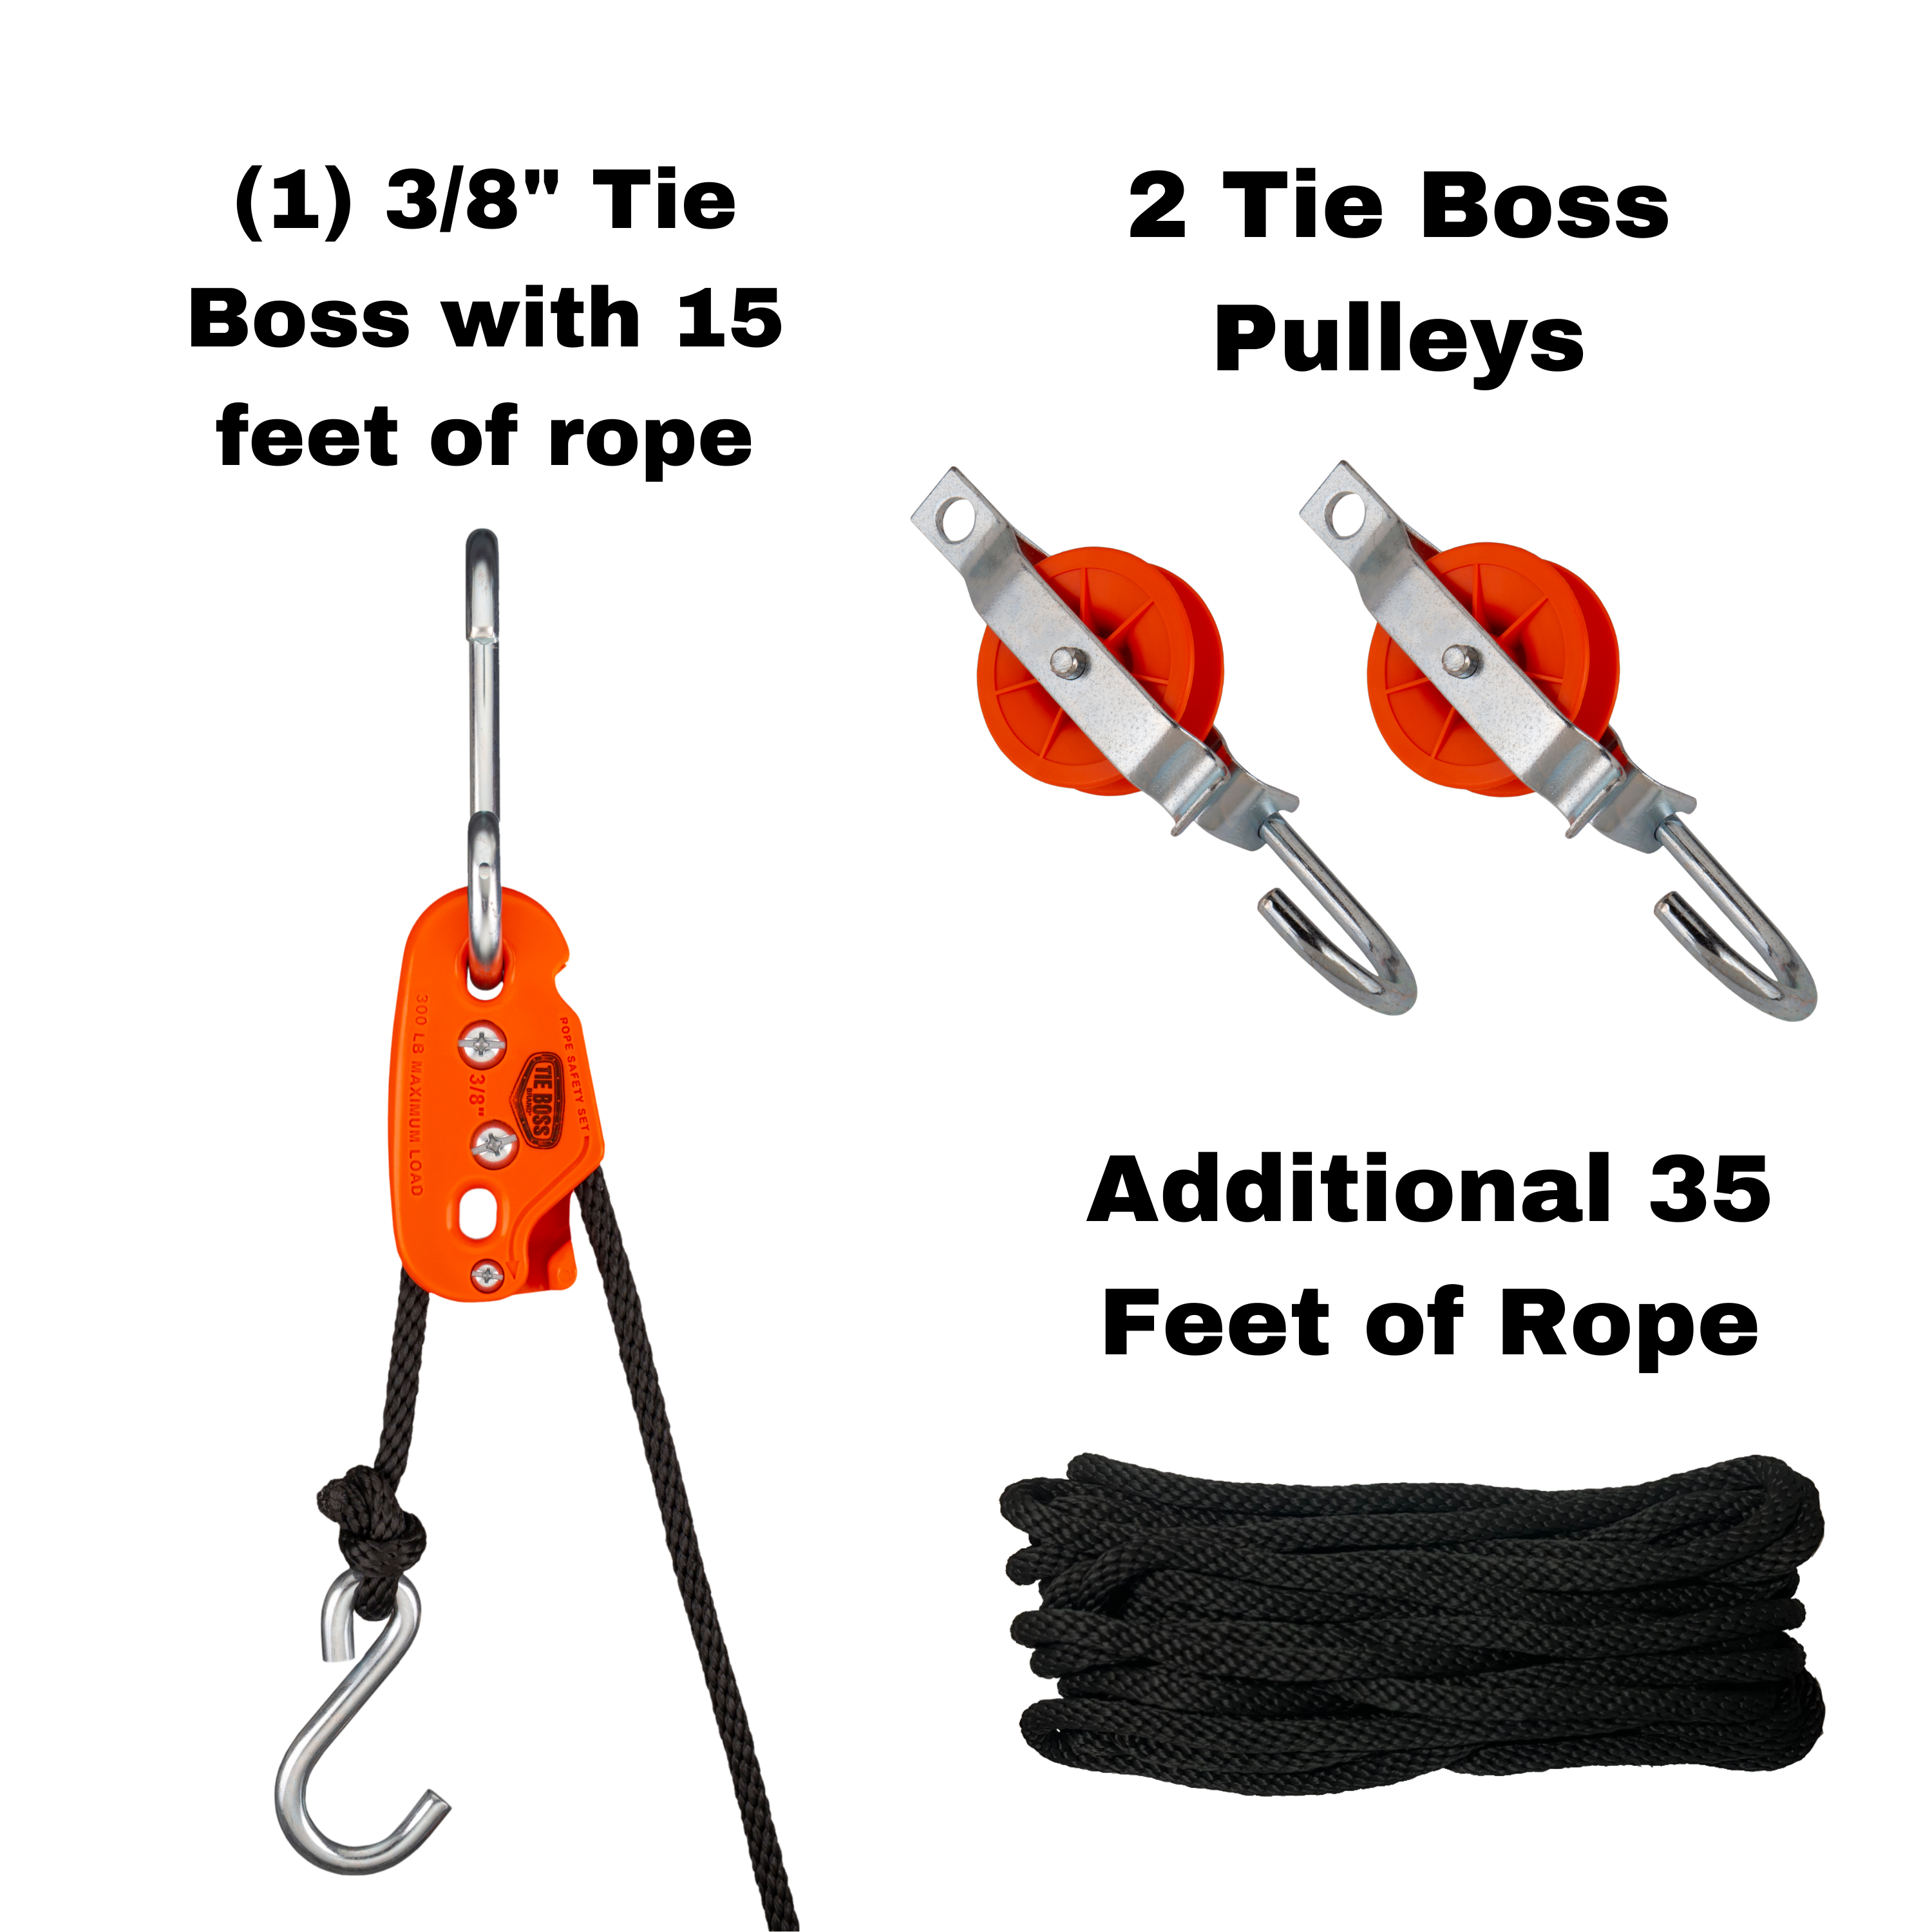 TIE BOSS Block and Tackle